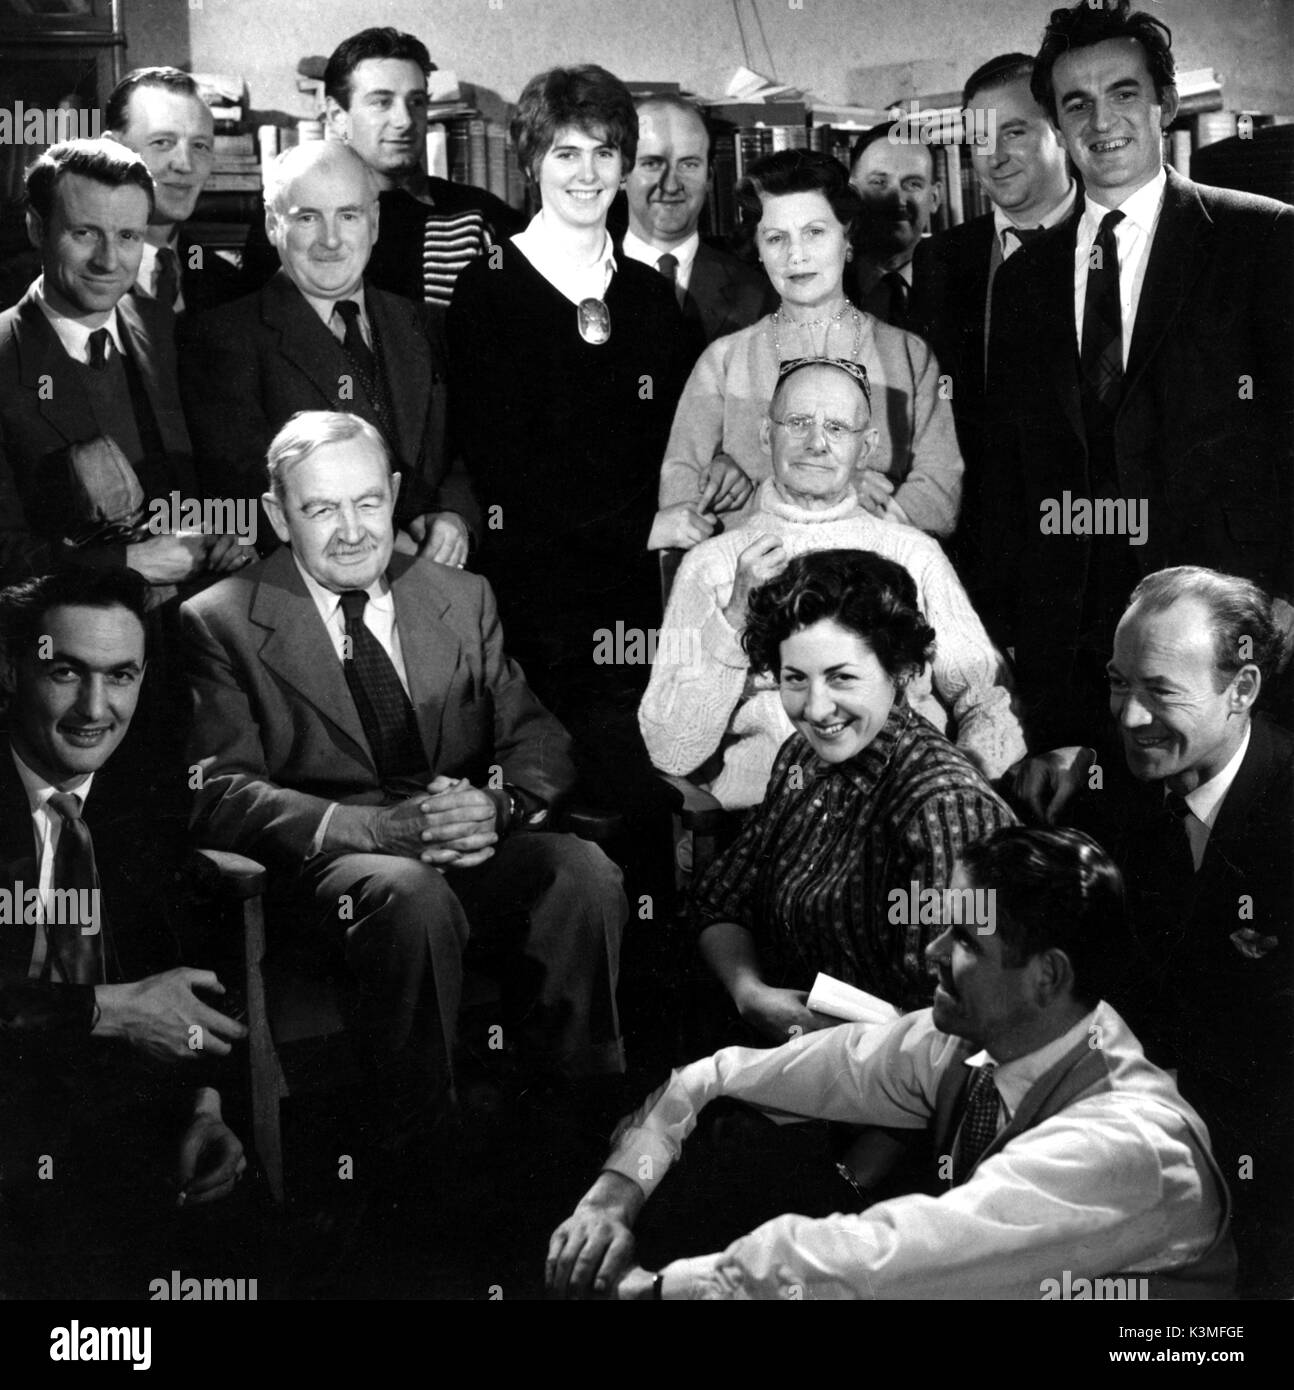 CRADLE OF GENIUS [BR TV 1961] [top L-R][unidentified], [unidentified], Director PAUL ROTHA, Sean O'Casey's daughter, [unidentified], Sean O'Casey's wife, Producer TOM HAYES, [unidentified], [unidentified] [bottom L-R] Camera Operator RALPH LARABEATTY ?, Actor BARRY FITZGERALD, Playwright SEAN O'CASEY, Continuity Girl RENEE GLYNNE, unidentified Assistant Director [below] unidentified grip     Date: 1961 Stock Photo